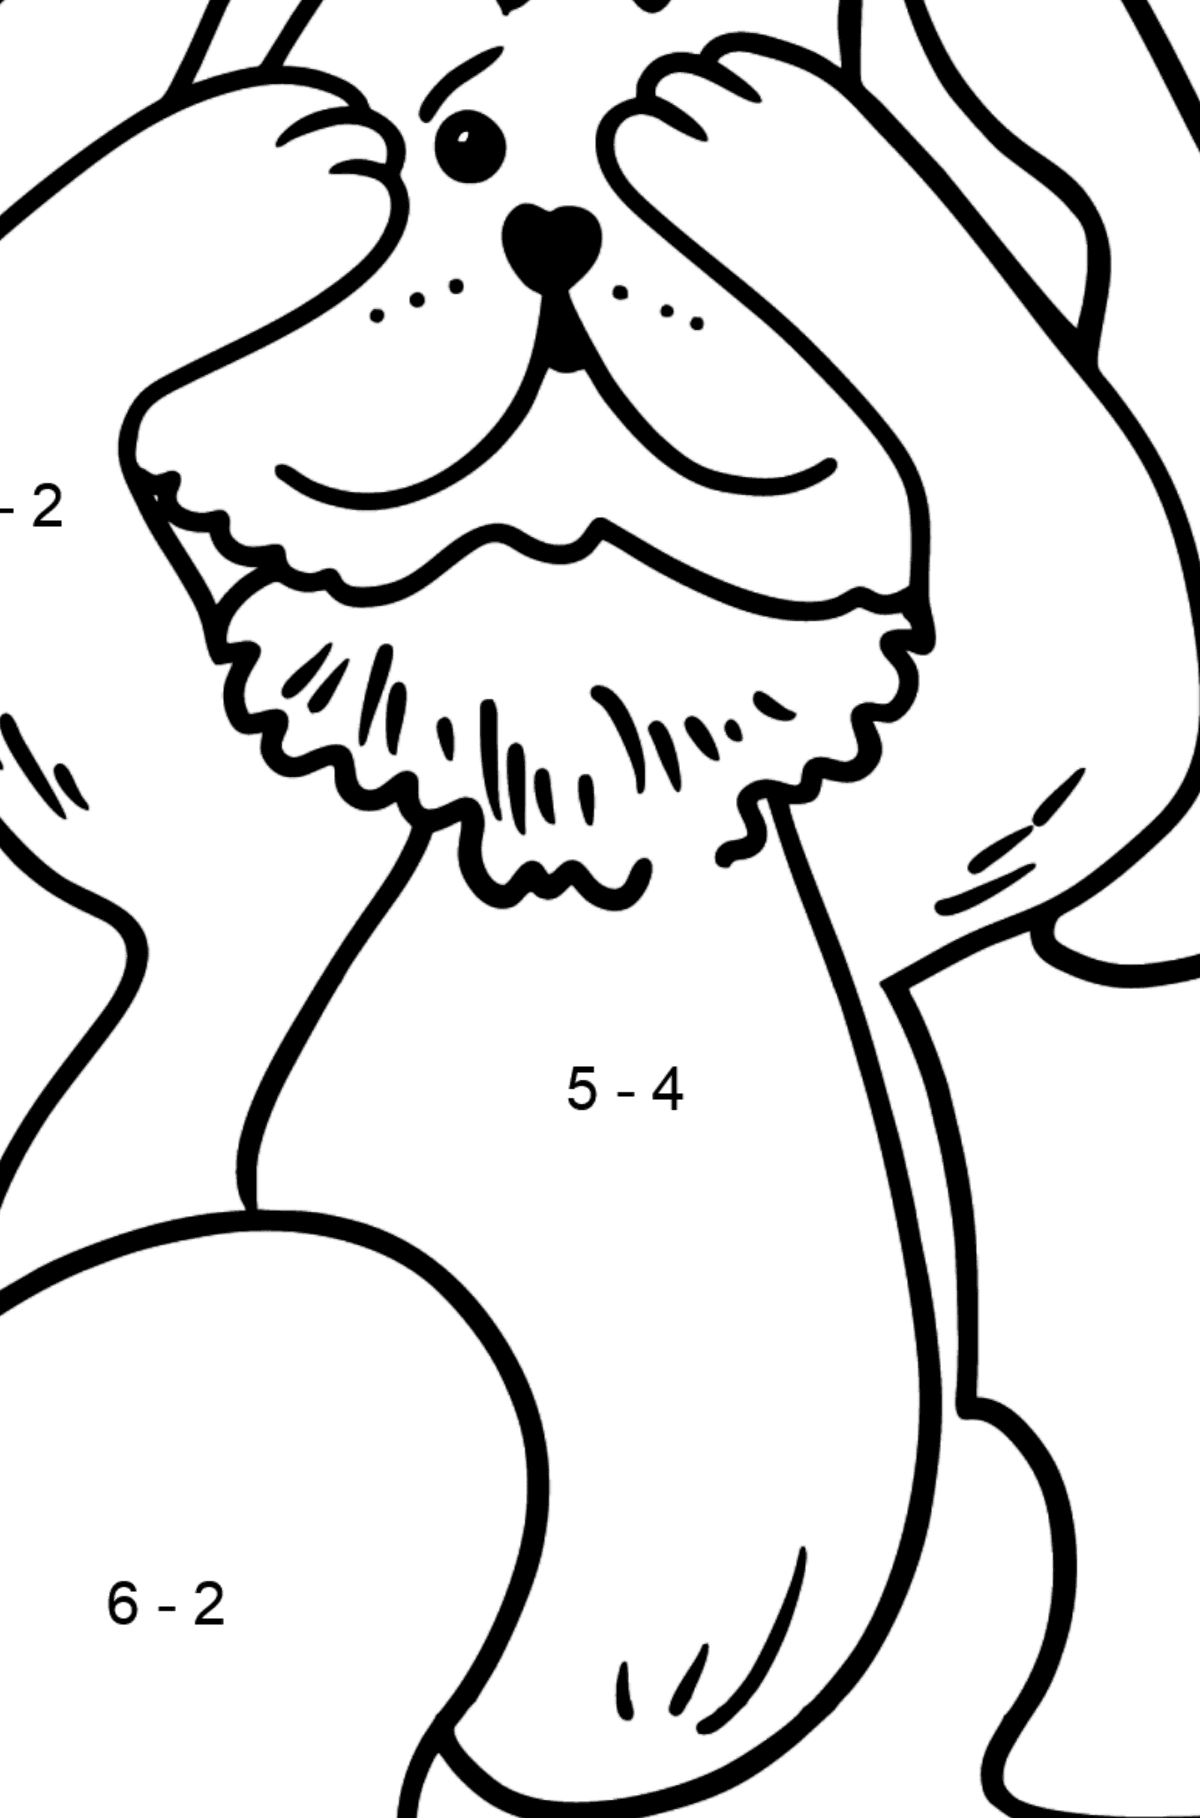 Scared Bunny coloring page - Math Coloring - Subtraction for Kids